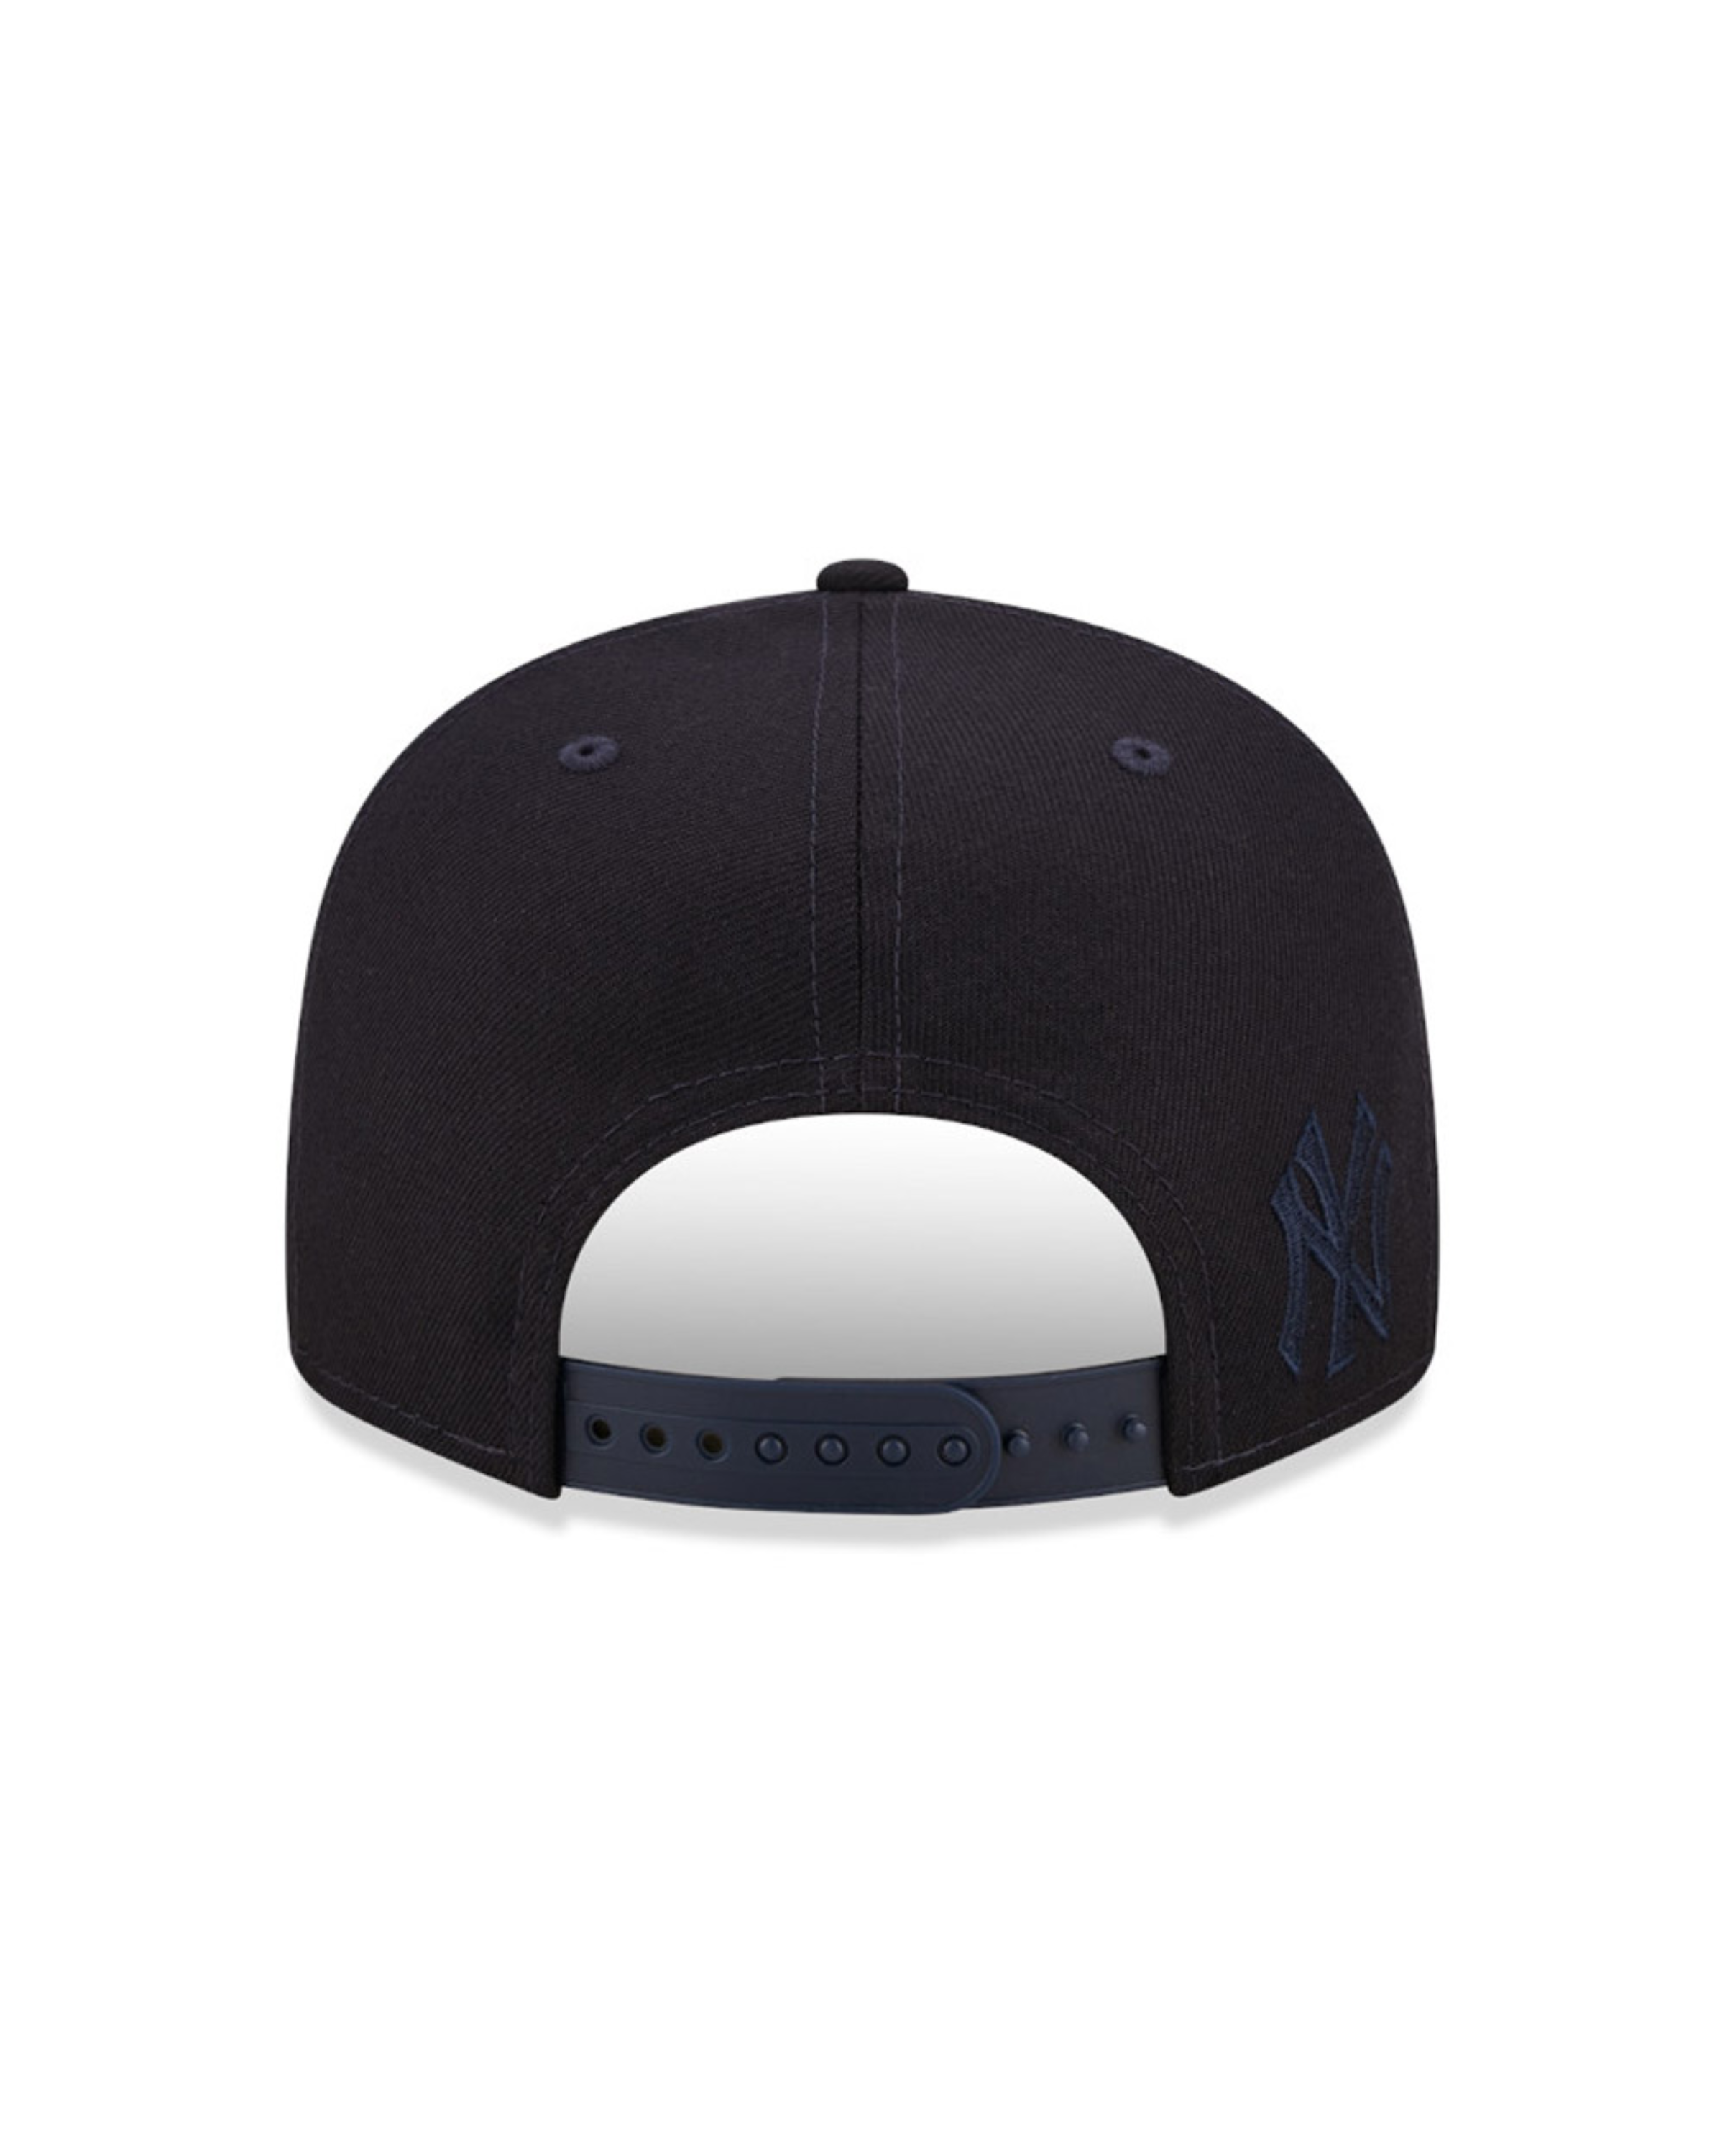 New York Yankees Typo Patch Navy 9FIFTY Snapback Cap